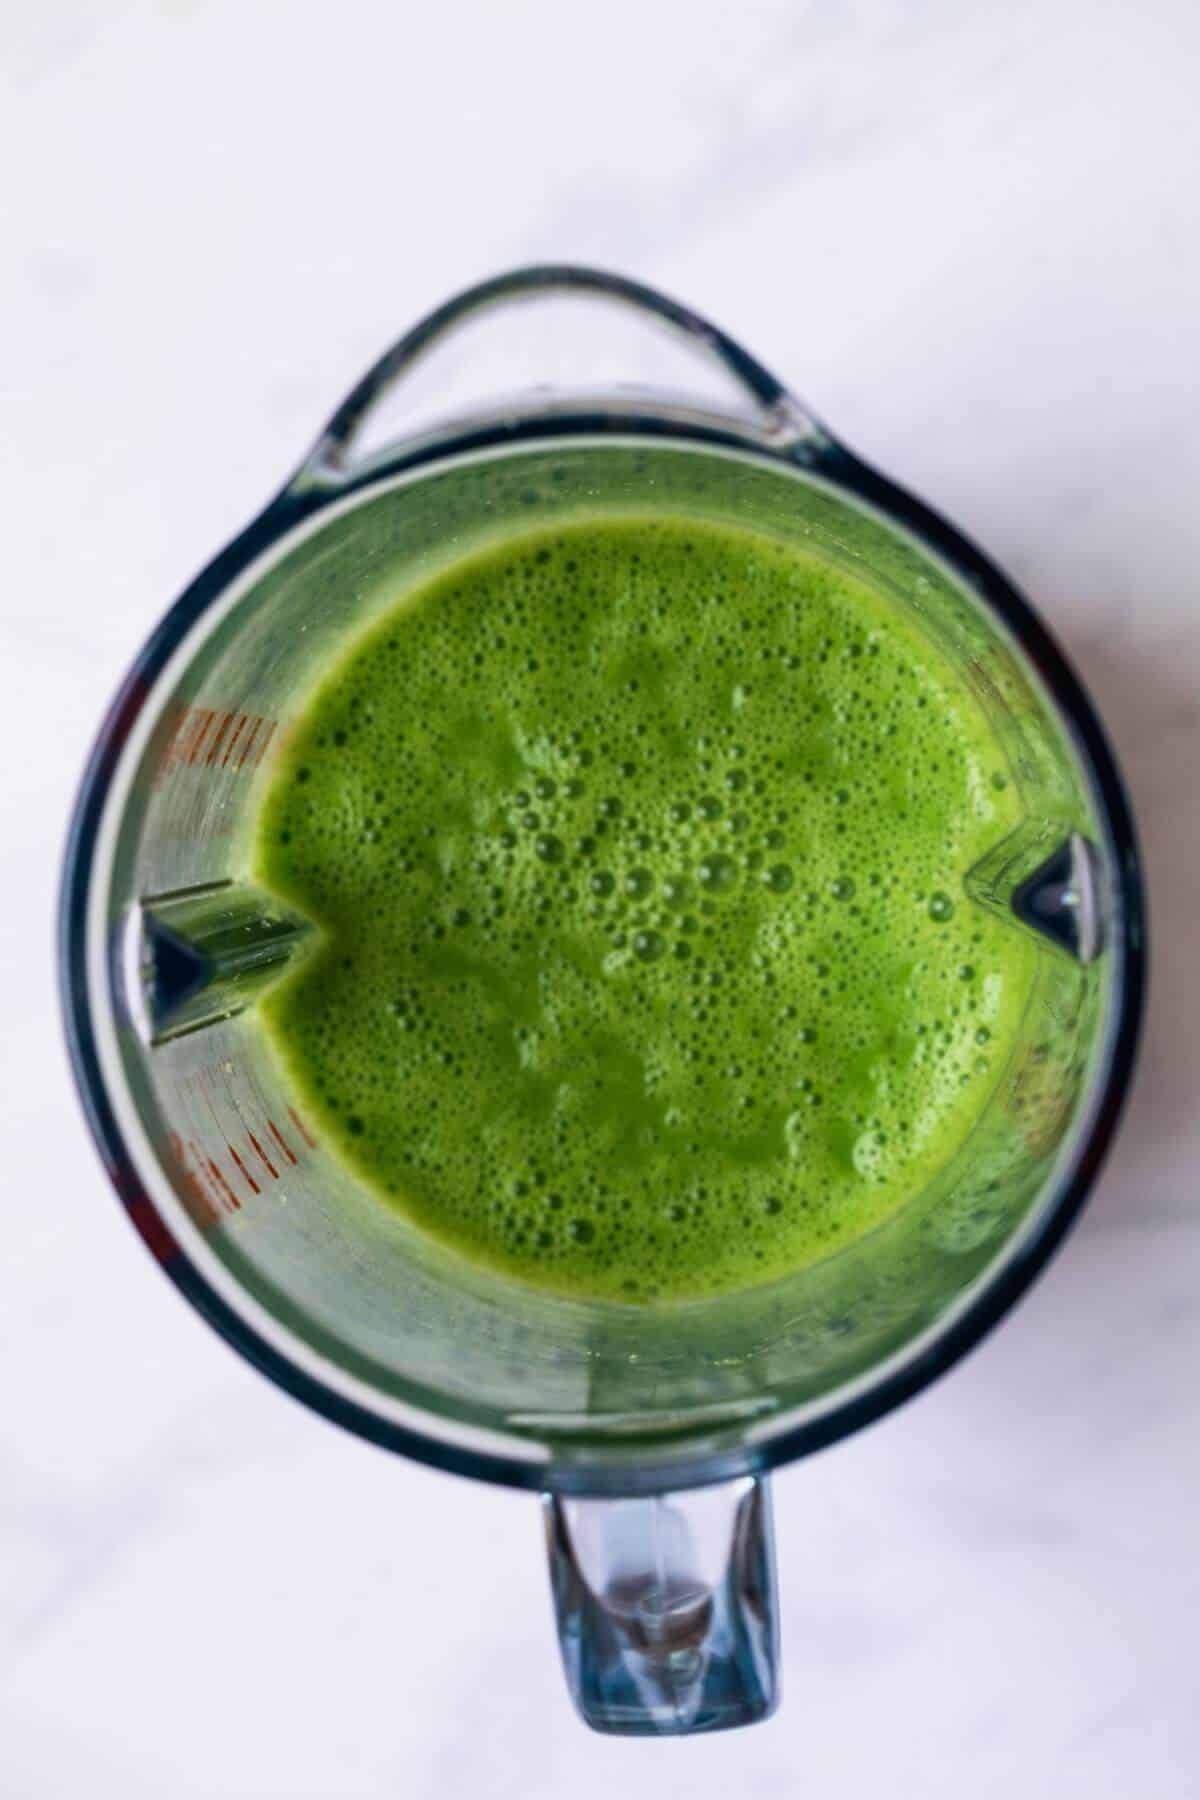 Bright green and bubbly, freshly blended green smoothie sitting in the blender.